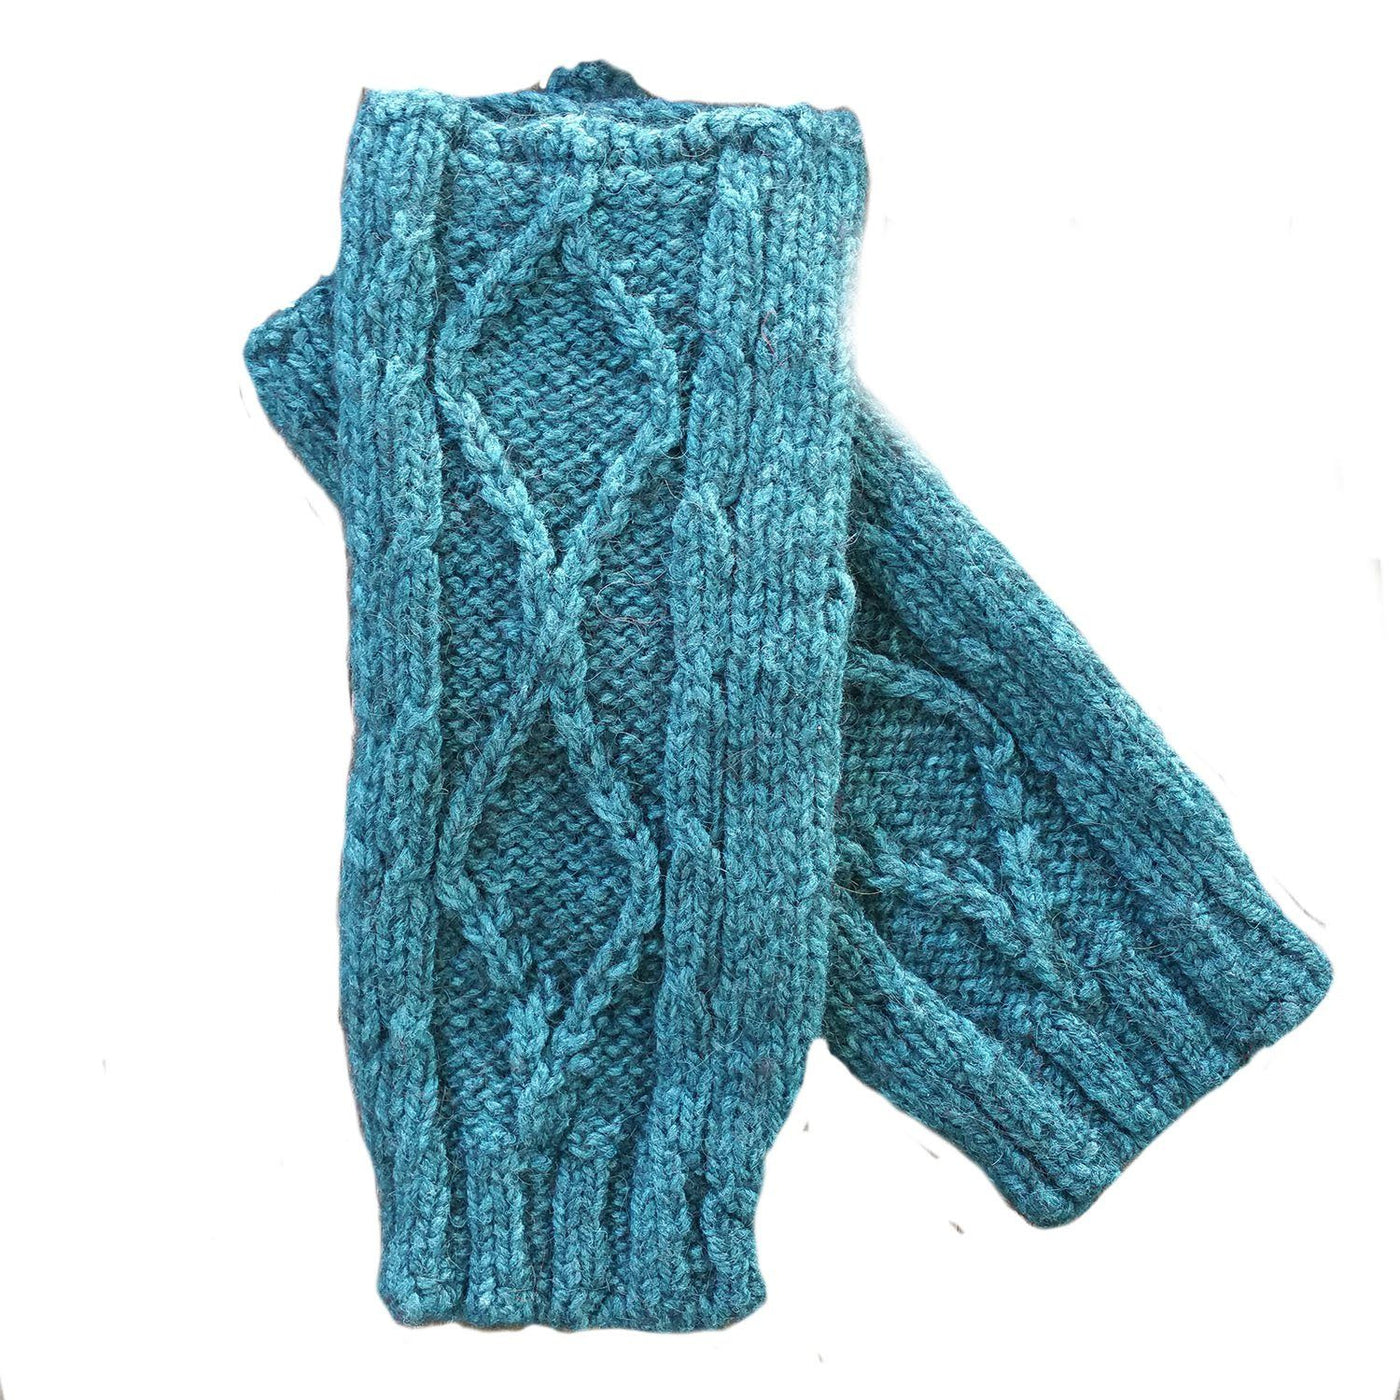 Diamond cabled knitted fingerless gloves Bison Gear The Buffalo Wool Co. Teal 